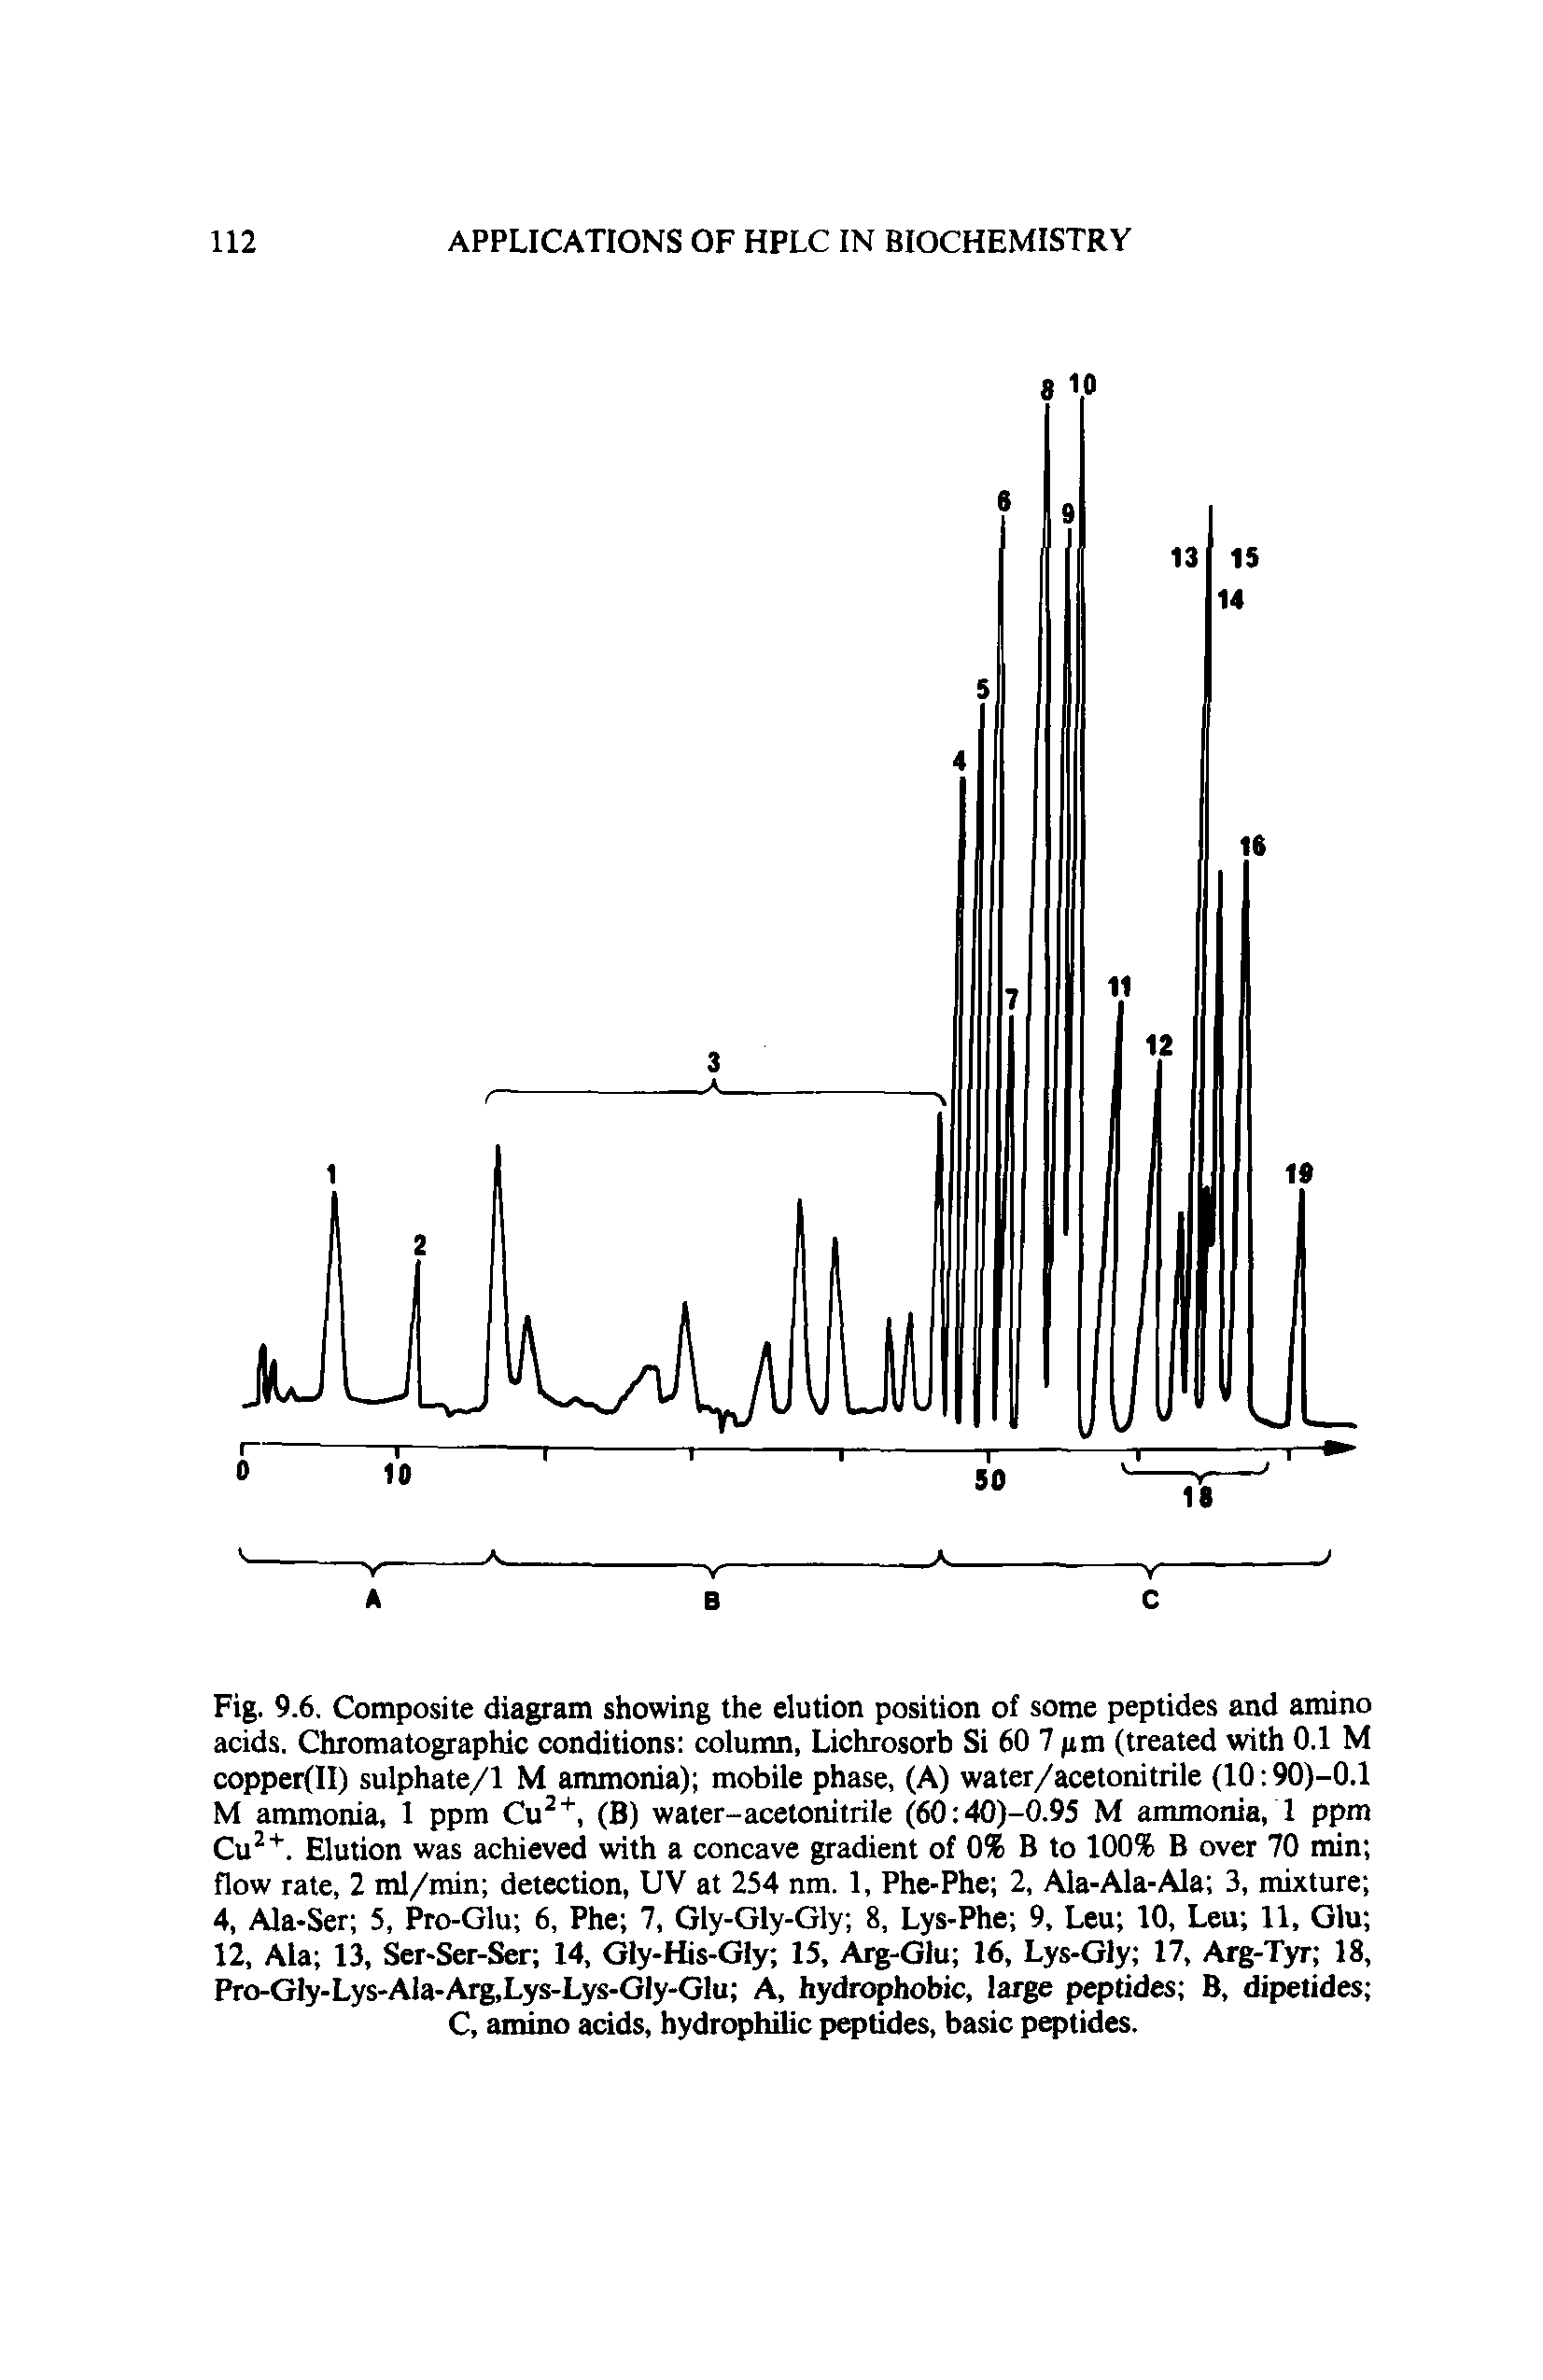 Fig. 9.6. Composite diagram showing the elution position of some peptides and amino acids. Chromatographic conditions column, Lichrosorb Si 60 7 fim (treated with 0.1 M copper(II) sulphate/1 M ammonia) mobile phase, (A) water/acetonitrile (10 90)-0.1 M ammonia, 1 ppm Cu " ", (B) water-acetonitrile (60 40)-0.95 M ammonia, 1 ppm Cu " ". Elution was achieved with a concave gradient of 0% B to 100% B over 70 min flow rate, 2 ml/min detection, UV at 254 nm. 1, Phe-Phe 2, Ala-Ala-Ala 3, mixture 4, Ala-Ser 5, Pro-Glu 6, Phe 7, Gly-Gly-Gly 8, Lys-Phe 9, Leu 10, Leu 11, Glu 12, Ala 13, Ser-Ser-Ser 14, Gly-His-Gly 15, Arg-Glu 16, Lys-Gly 17, Arg-Tyr 18, Pro-Gly-Lys-Ala-Arg,Lys-Lys-Gly-Glu A, hydrophobic, large peptides B, dipetides C, amino acids, hydrophilic peptides, basic peptides.